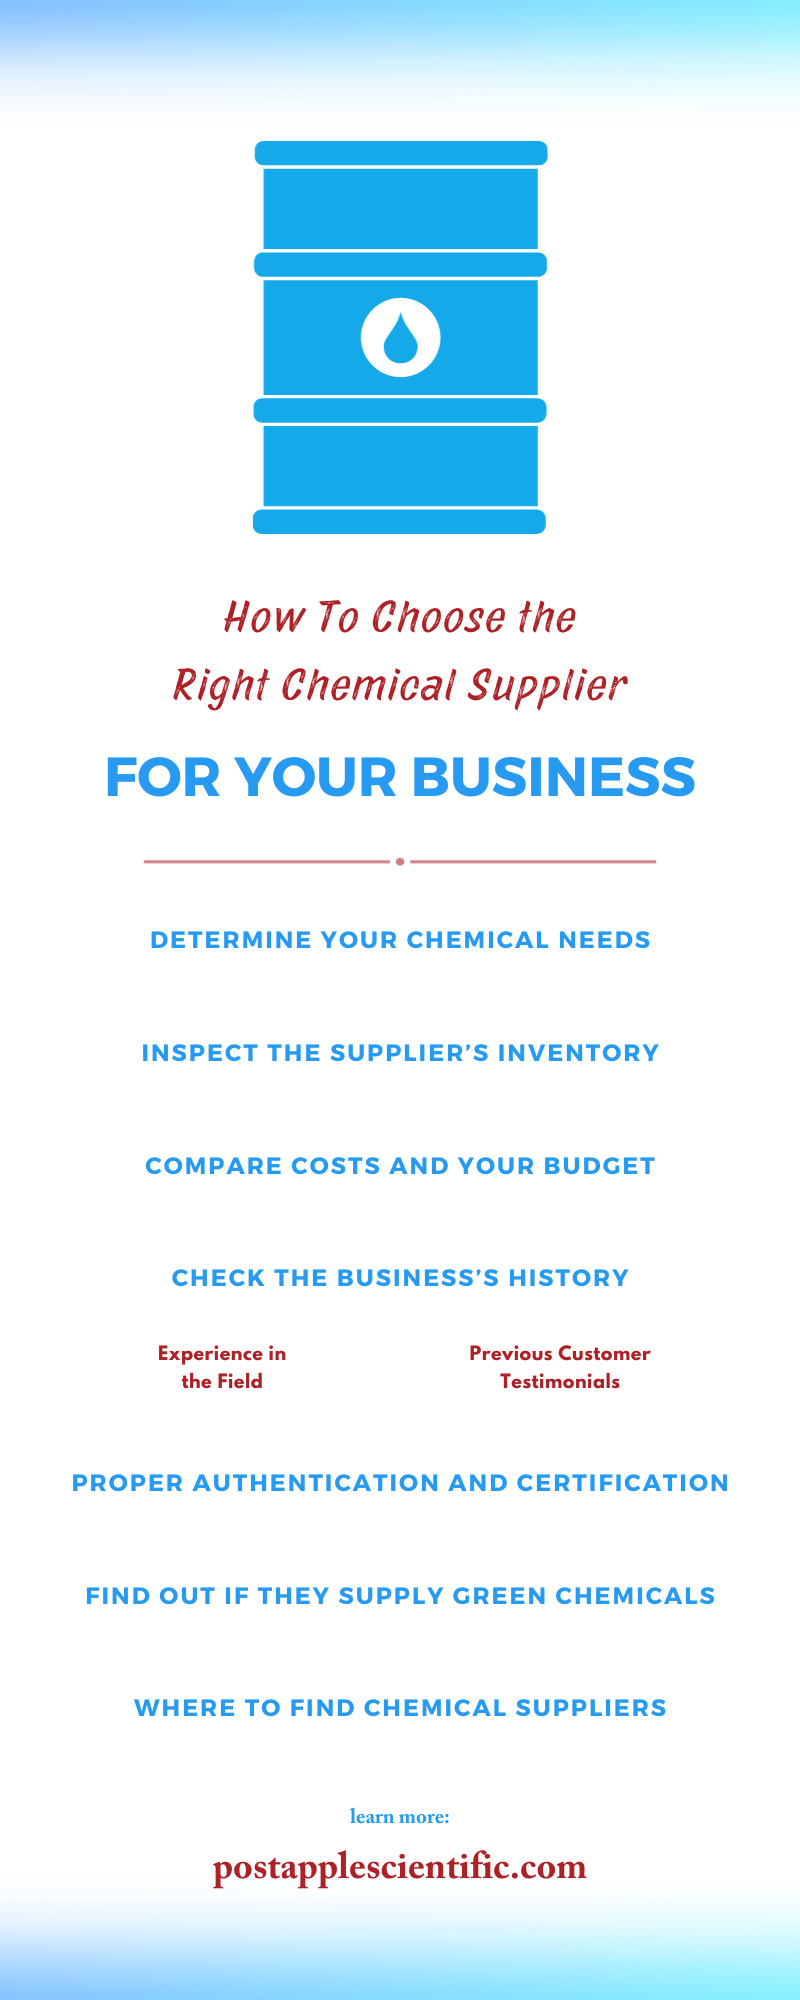 How To Choose the Right Chemical Supplier for Your Business